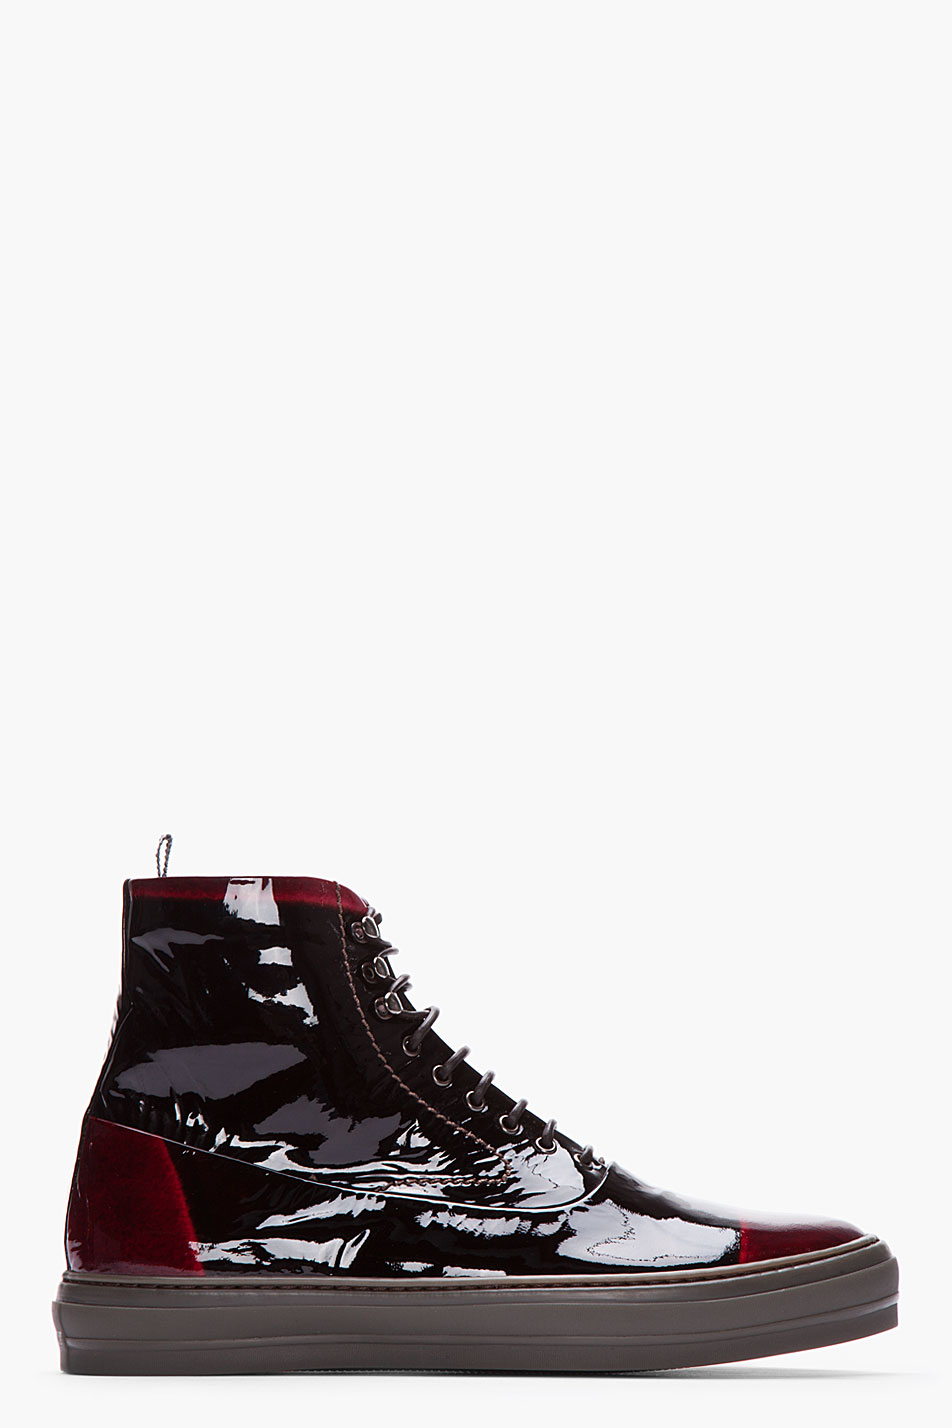 Lyst - Alexander mcqueen Black and Burgundy Patent Leather High Top ...